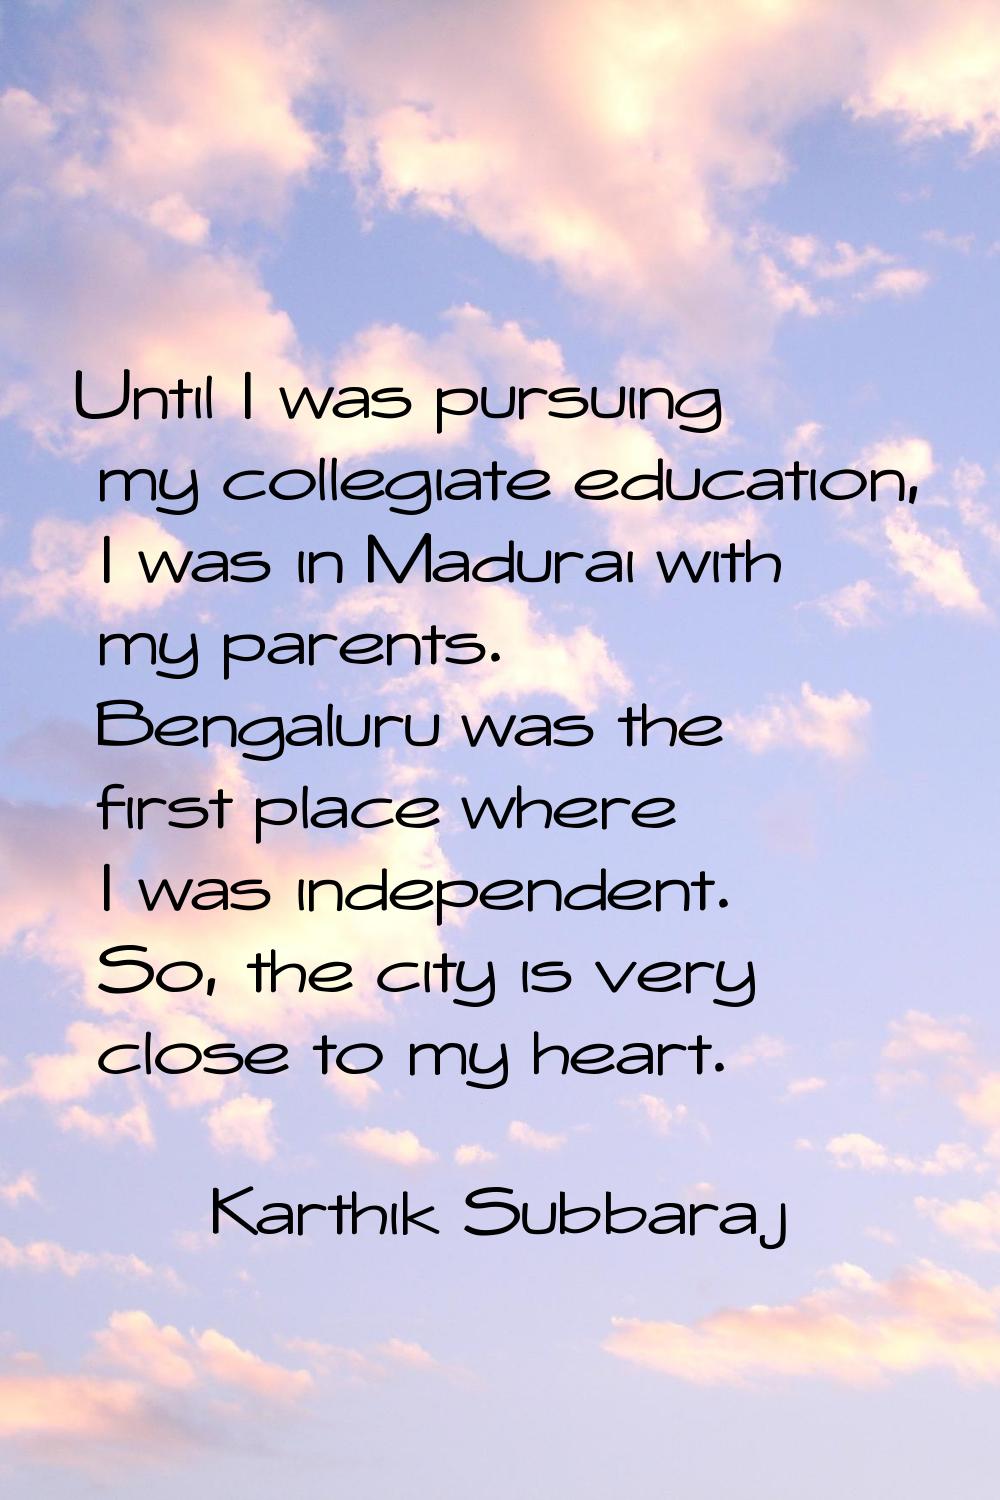 Until I was pursuing my collegiate education, I was in Madurai with my parents. Bengaluru was the f